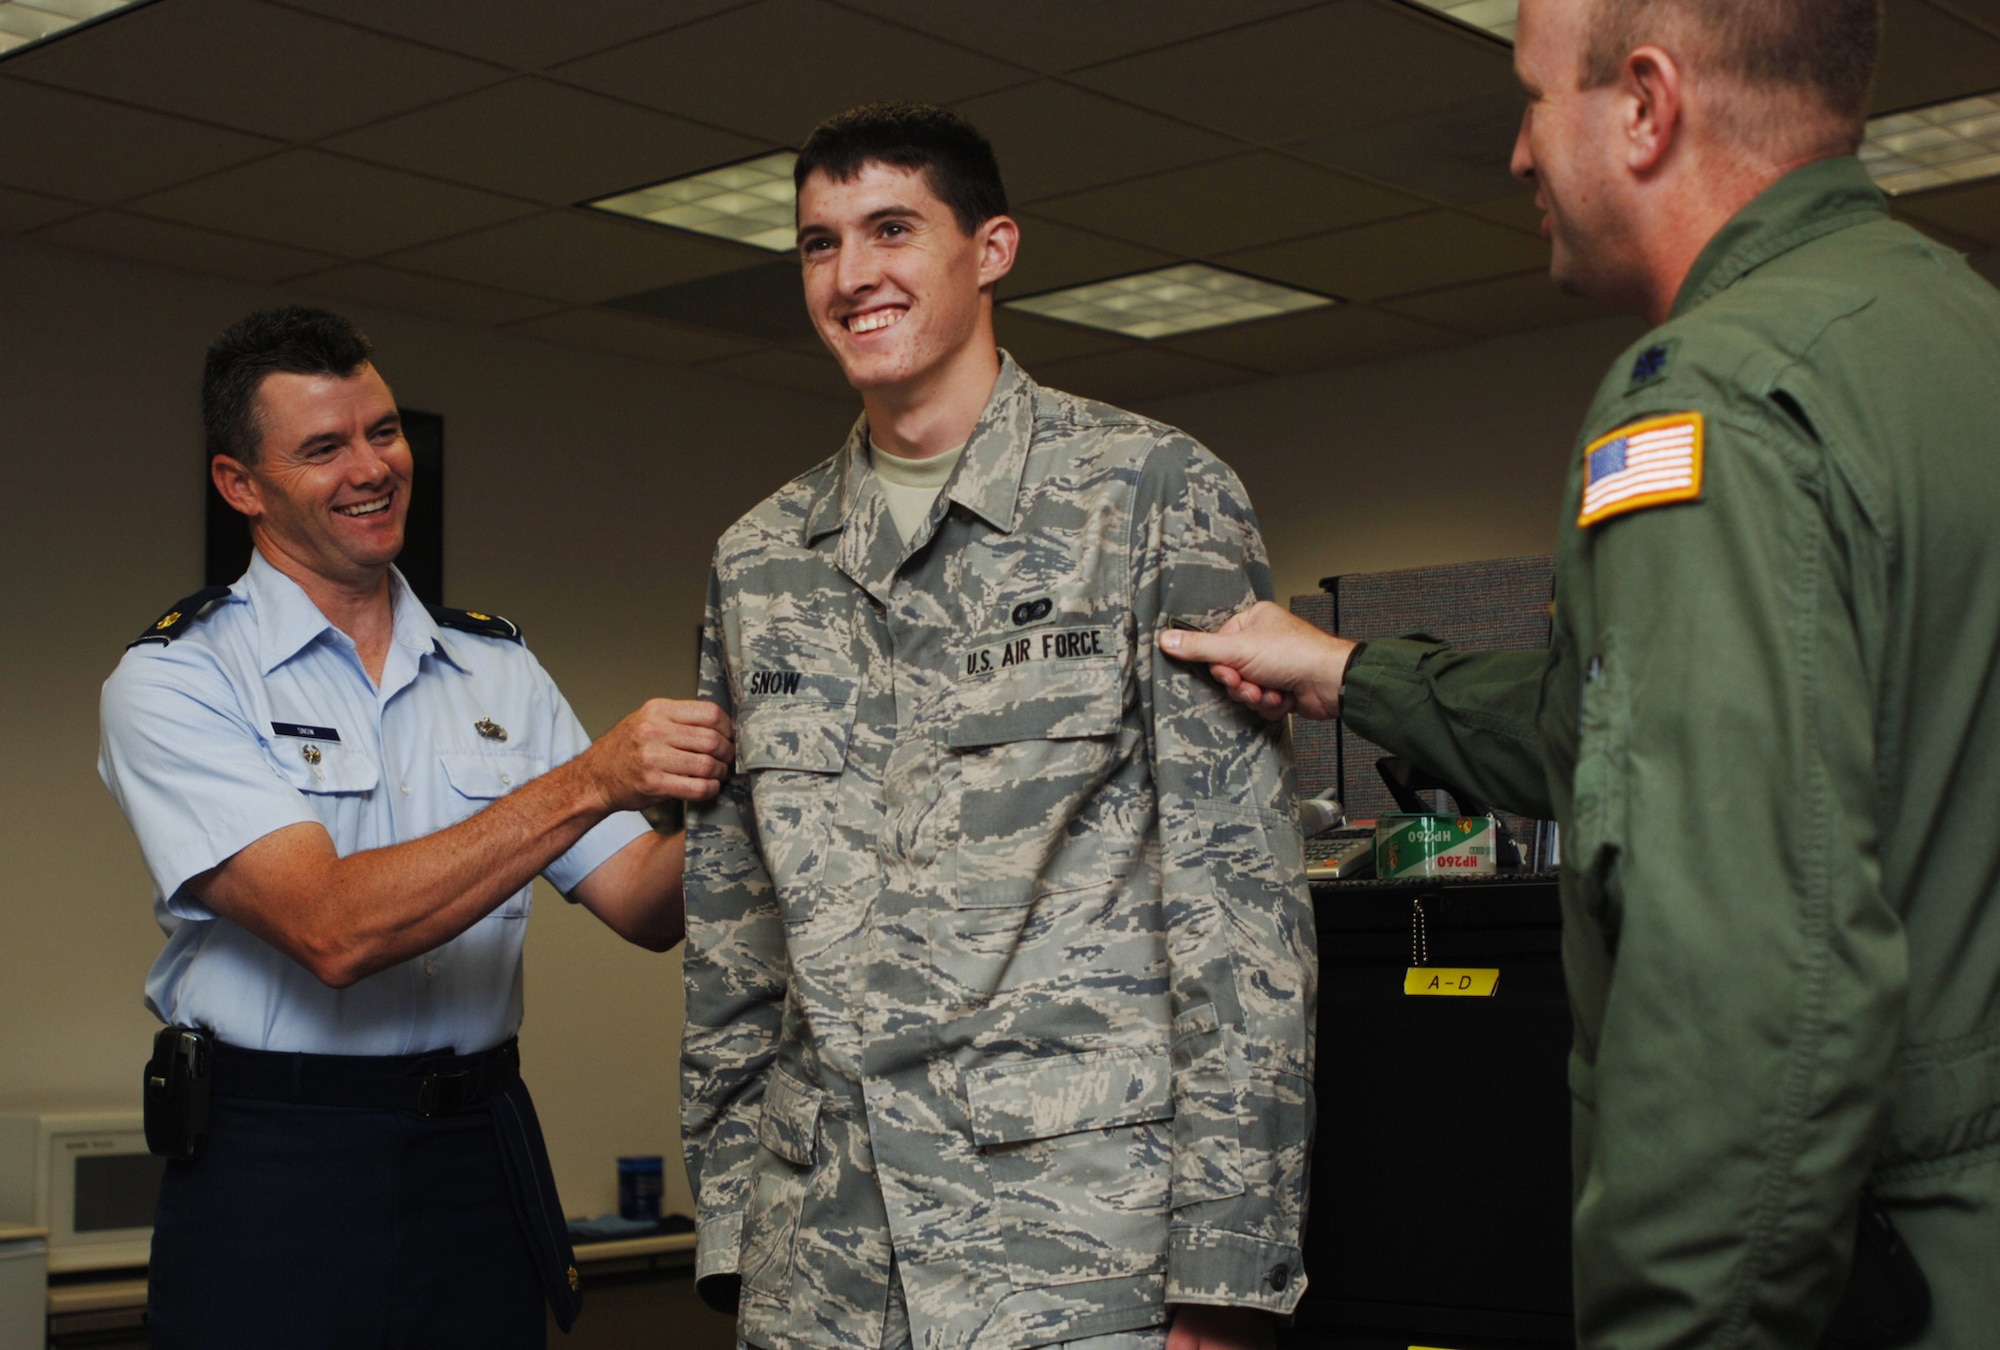 Elliott Snow gets promoted to the rank of airman first class during a ceremony at the 931st Military Personnel Flight office on July 31.  Helping tack on Airman Snow's new rank is his father, Maj. Mark Snow (on left), Director of Staff for the 22nd Air Refueling Wing at McConnell Air Force Base, Kan.  Adding rank insignia to Airman Snow's other sleeve is Lt. Col. Chris Amend, 931st Operations Support Flight commander.  Airman Snow is an information manager assigned to the 931st Aerospace Medicine Flight currently training with the 931st Communication and Information Systems Flight. (U.S. Air Force photo/Tech. Sgt. Jason Schaap)